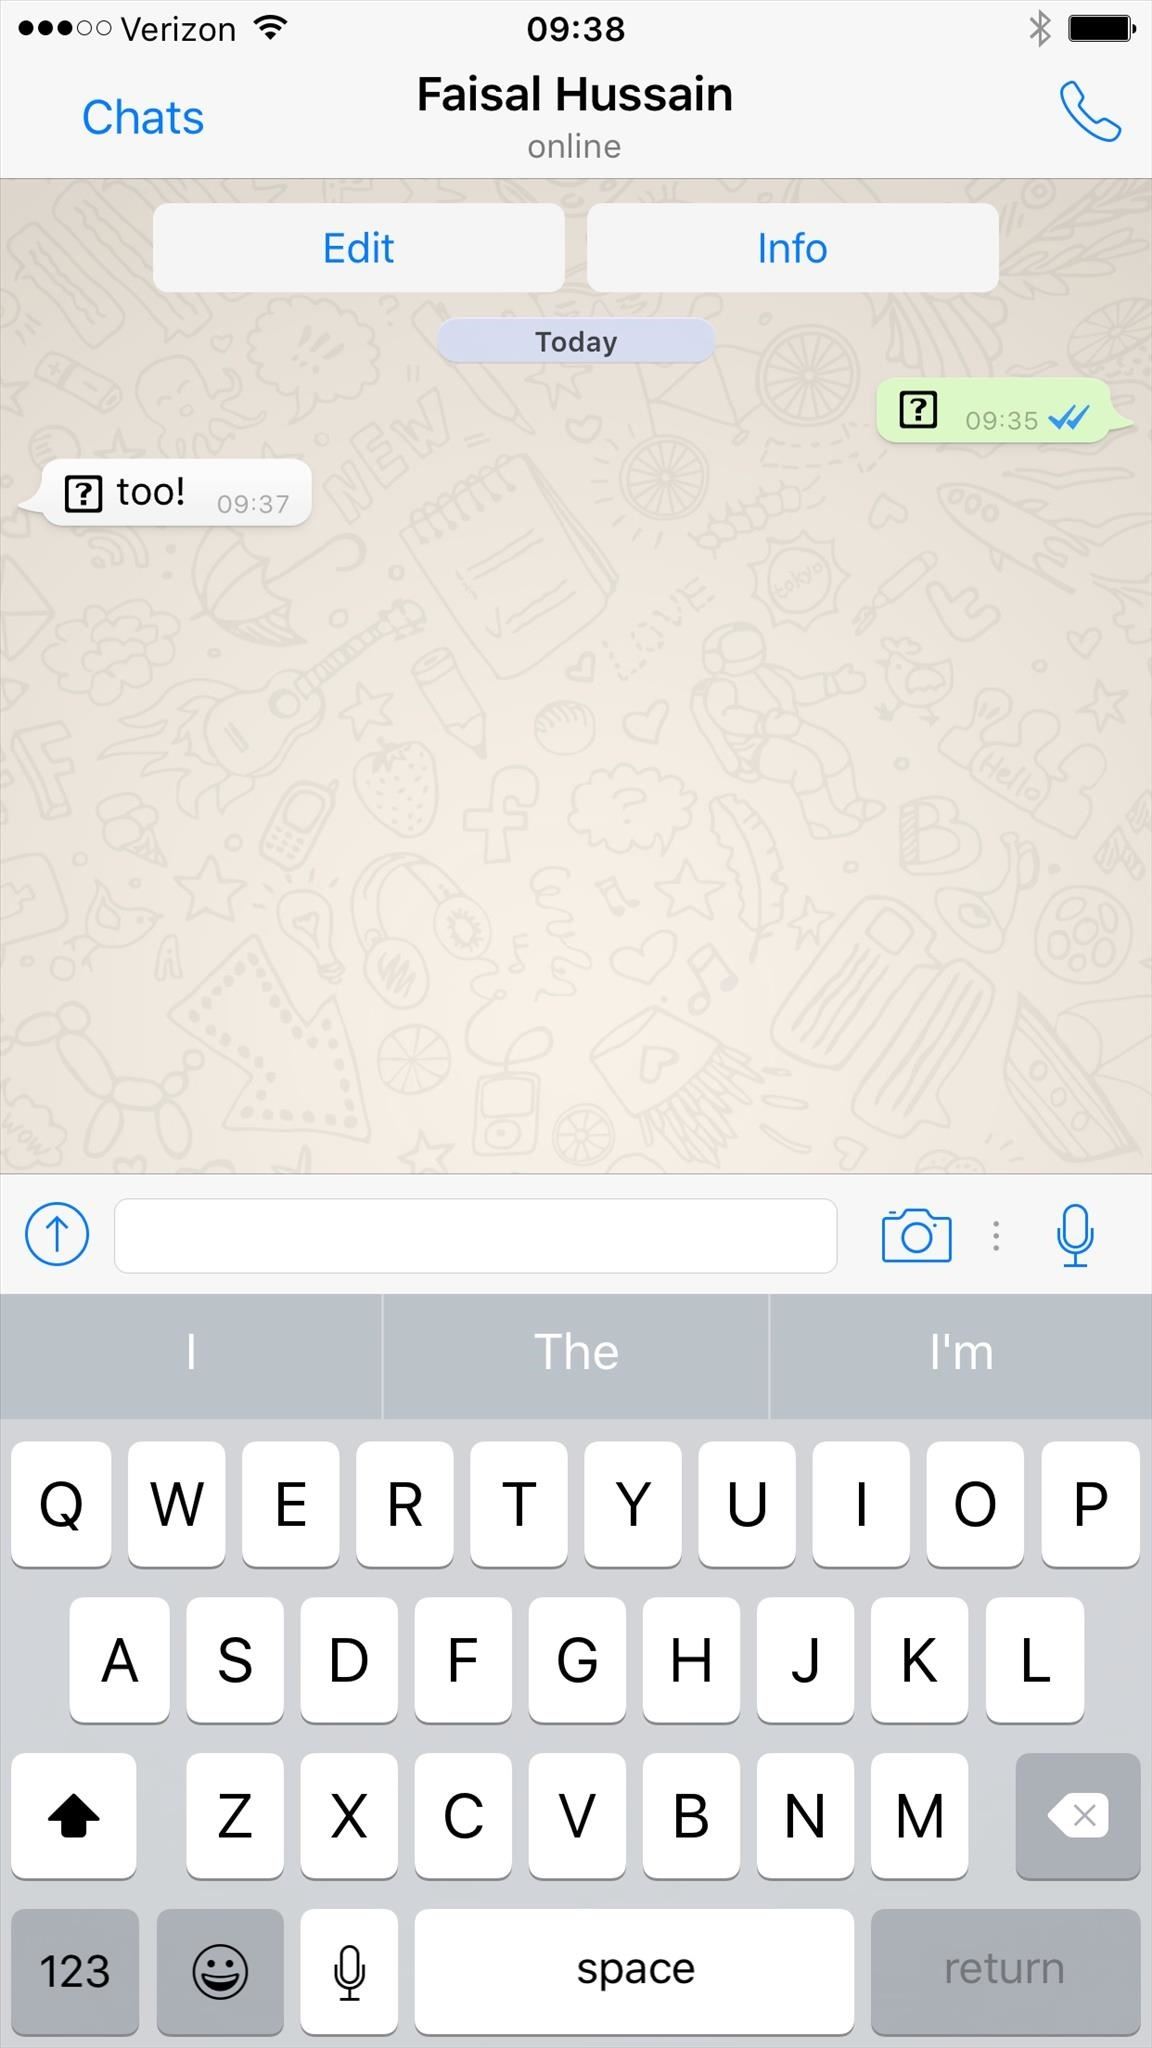 How to Use the Middle Finger Emoji on WhatsApp